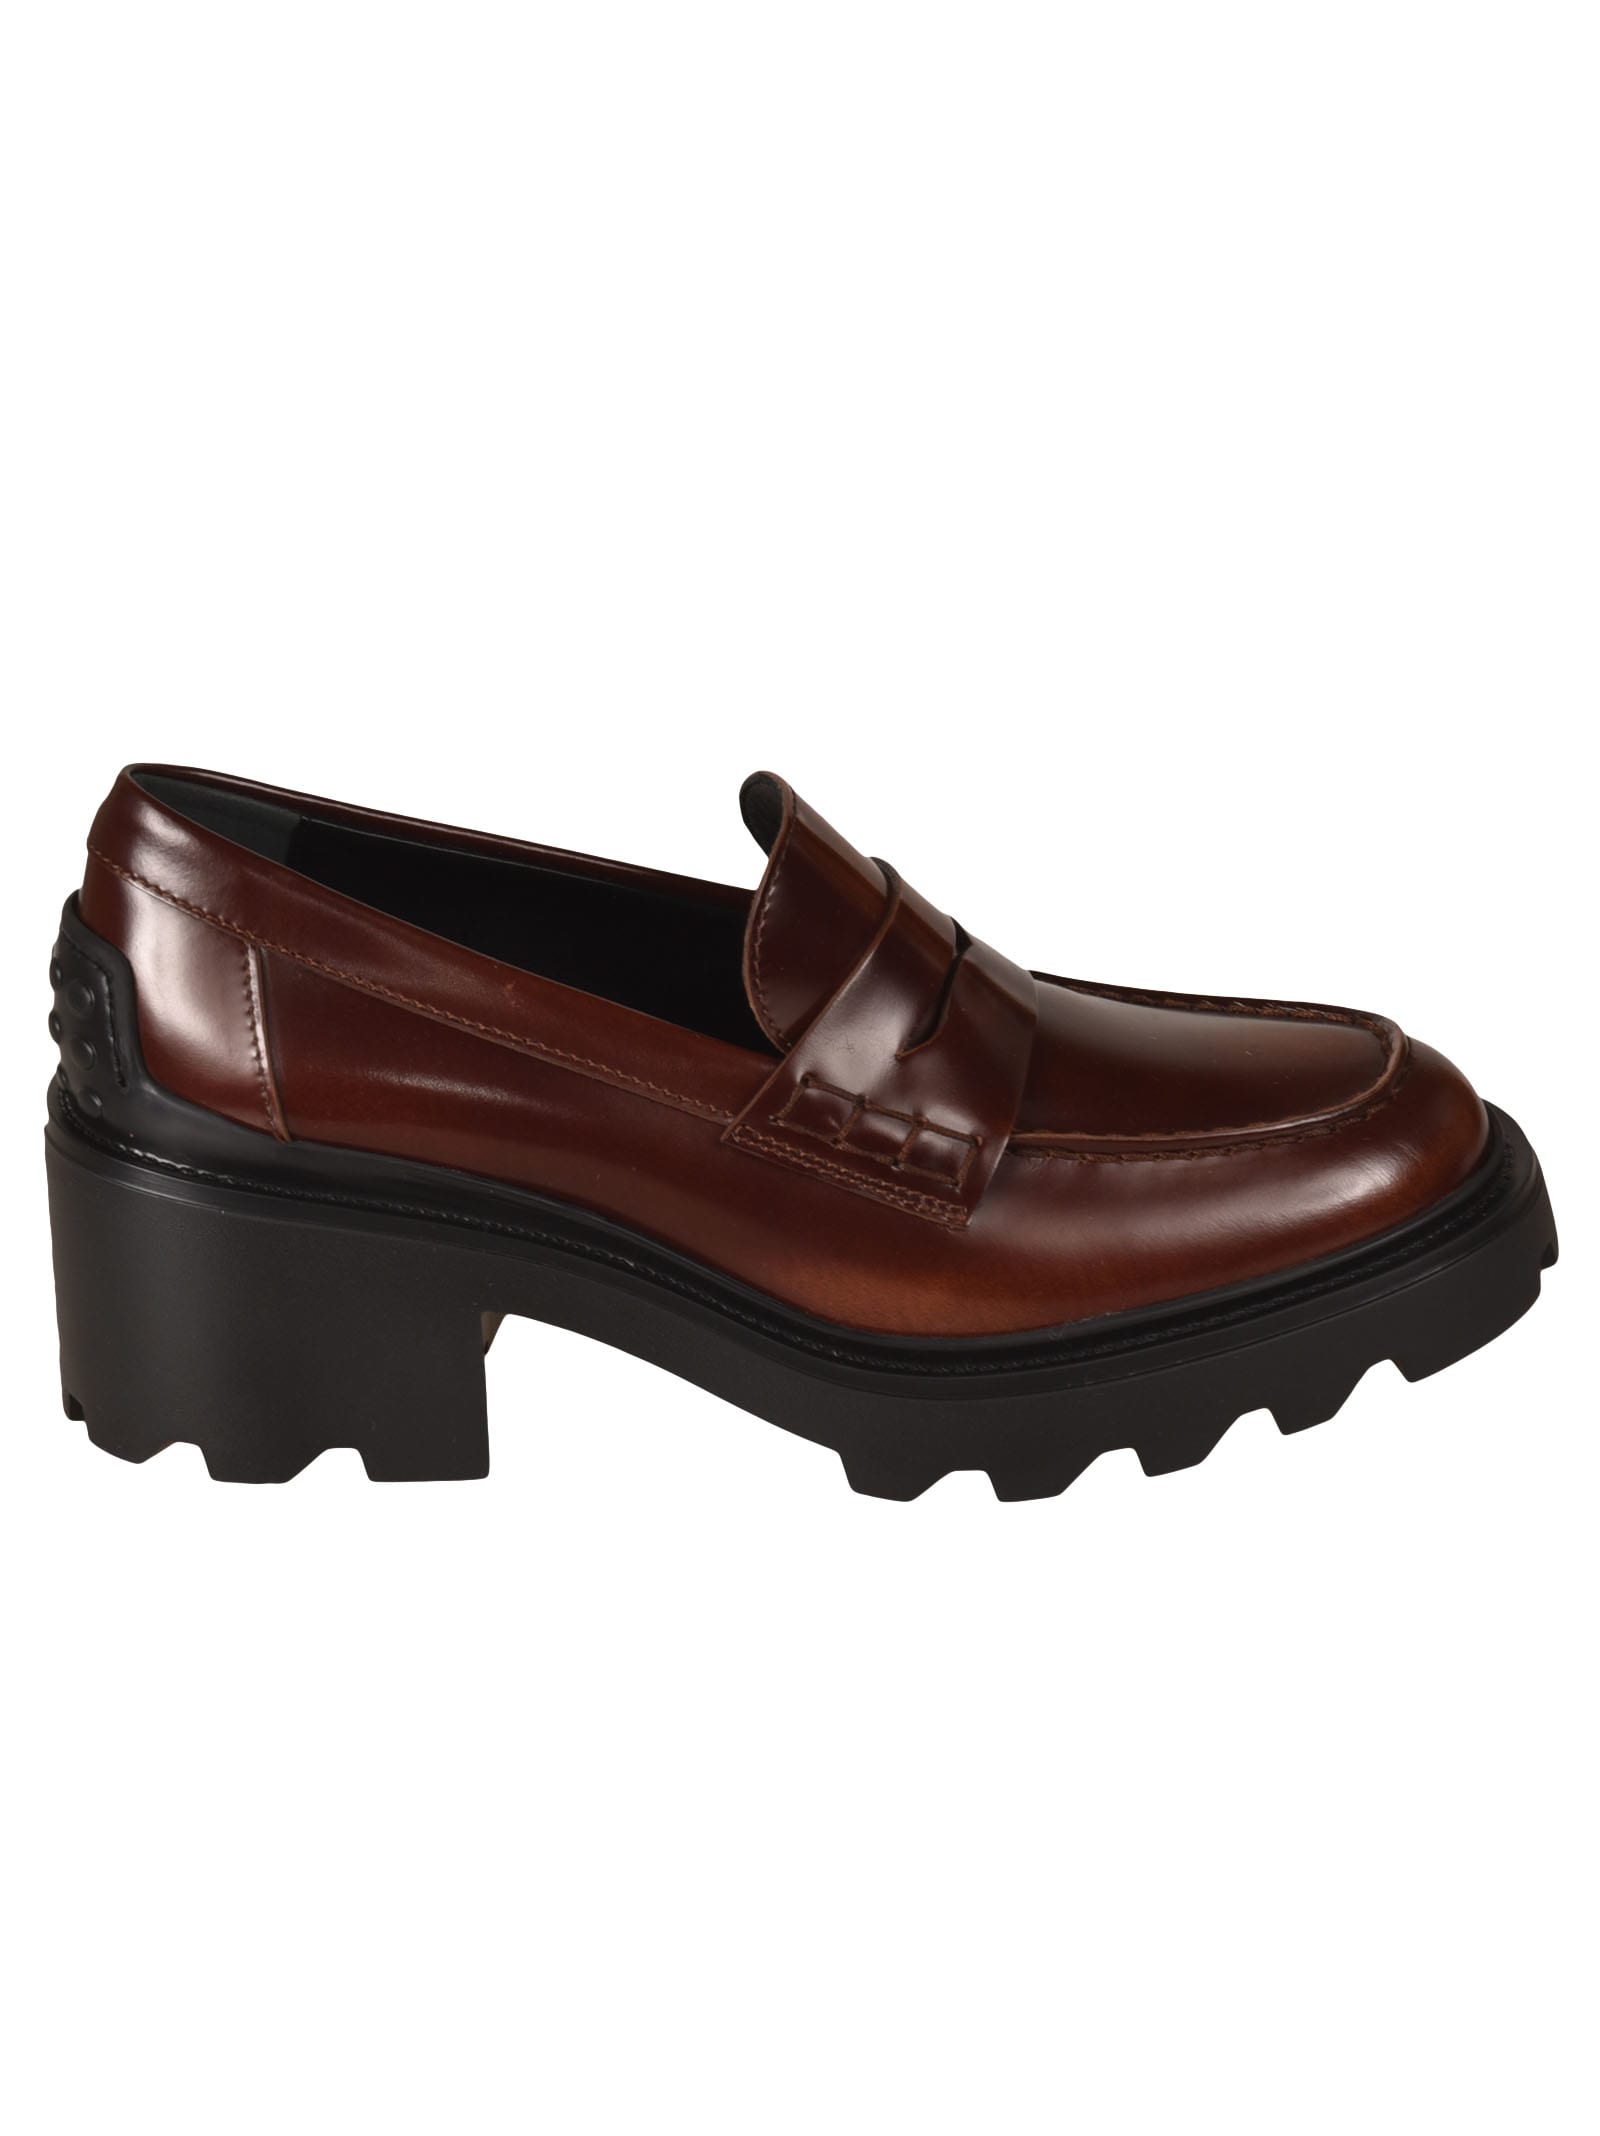 Tods Block Heel Leather Loafers